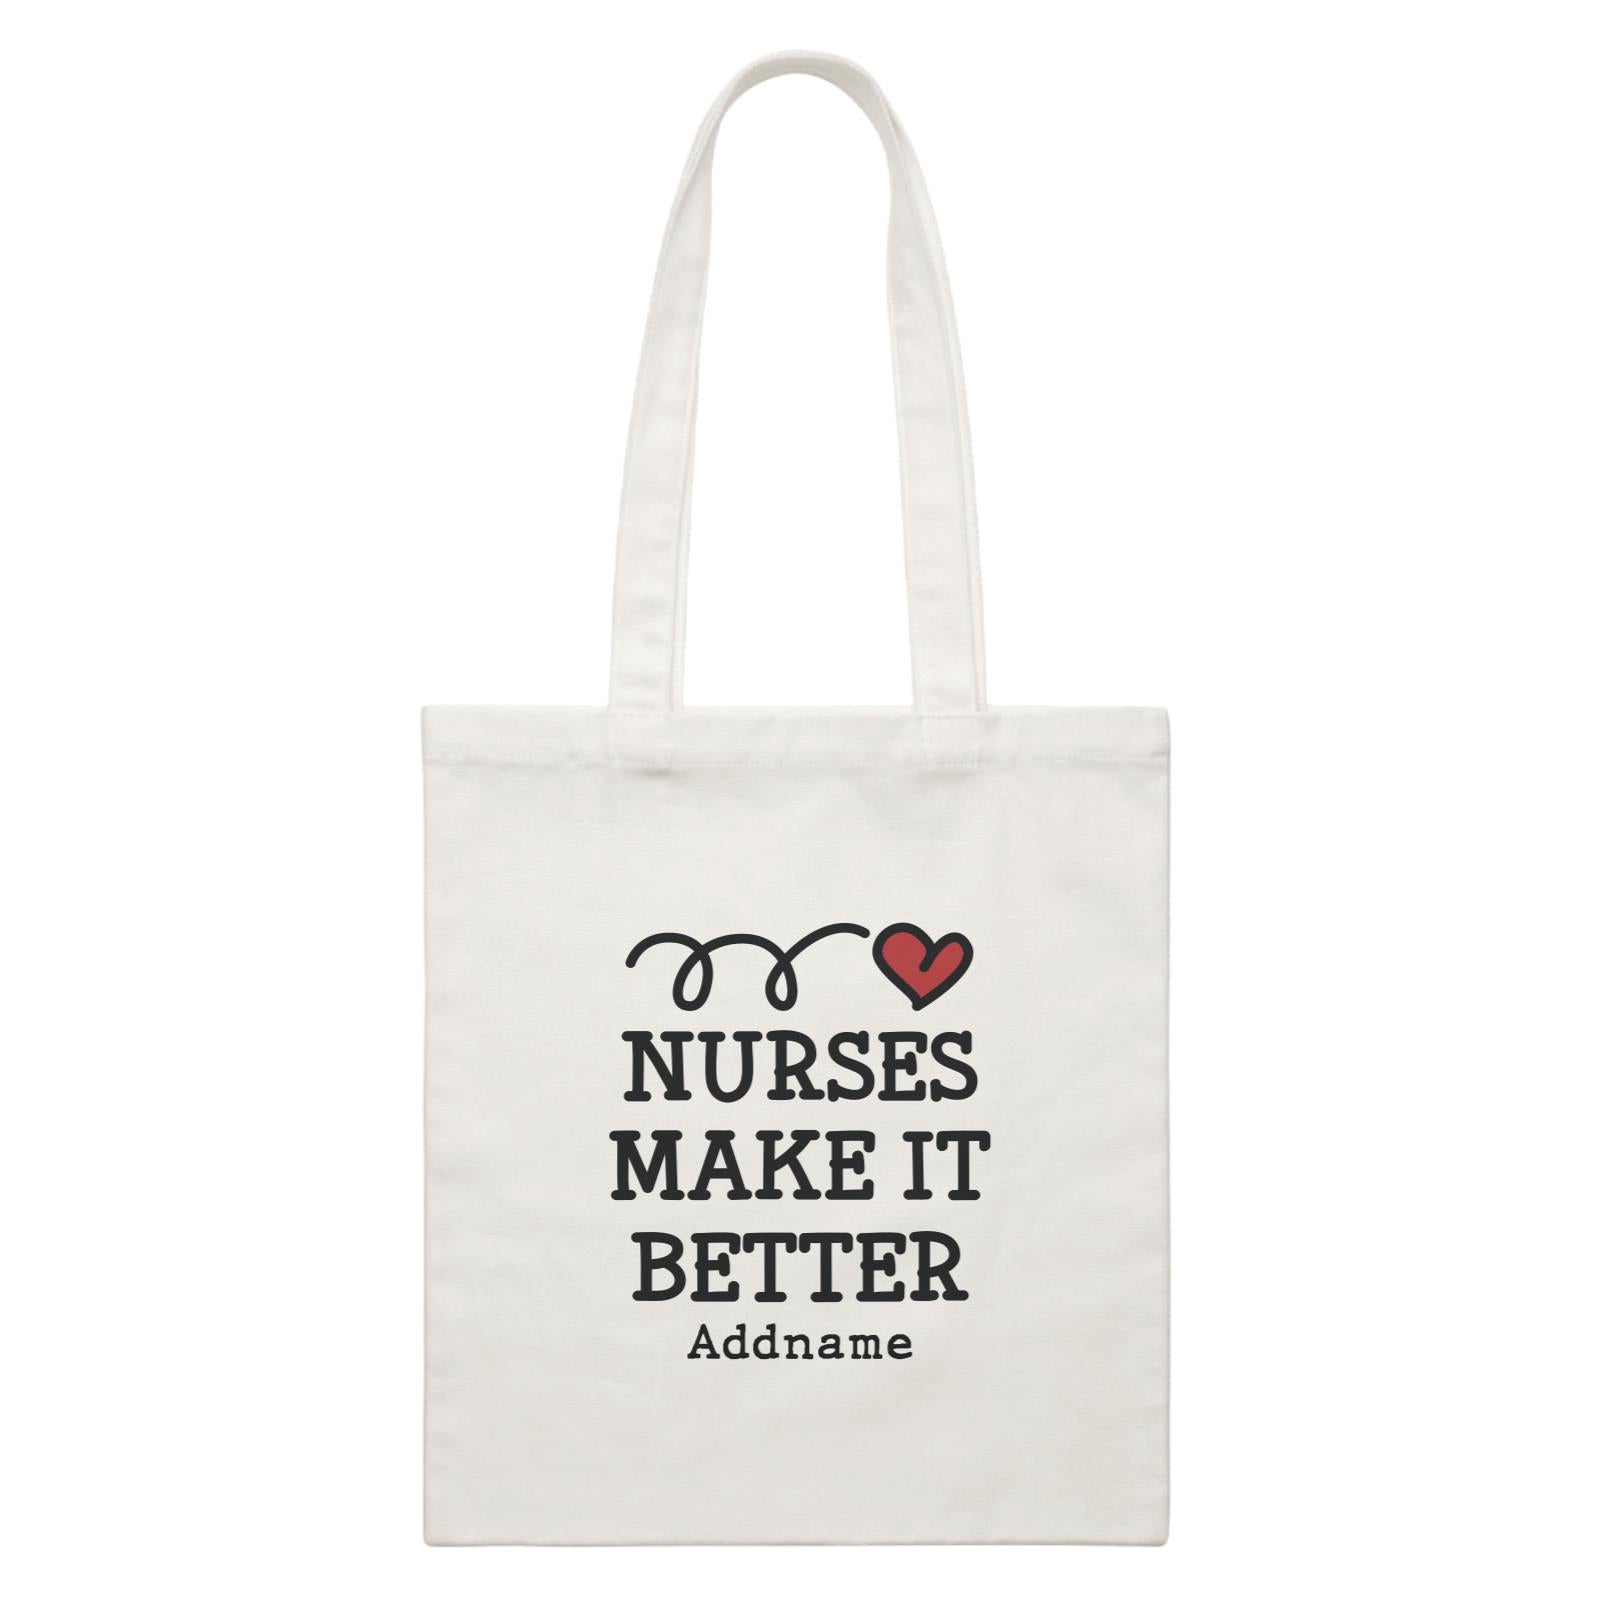 Nurse Quotes Jumping Heart Nurses Make It Better Addname White Canvas Bag